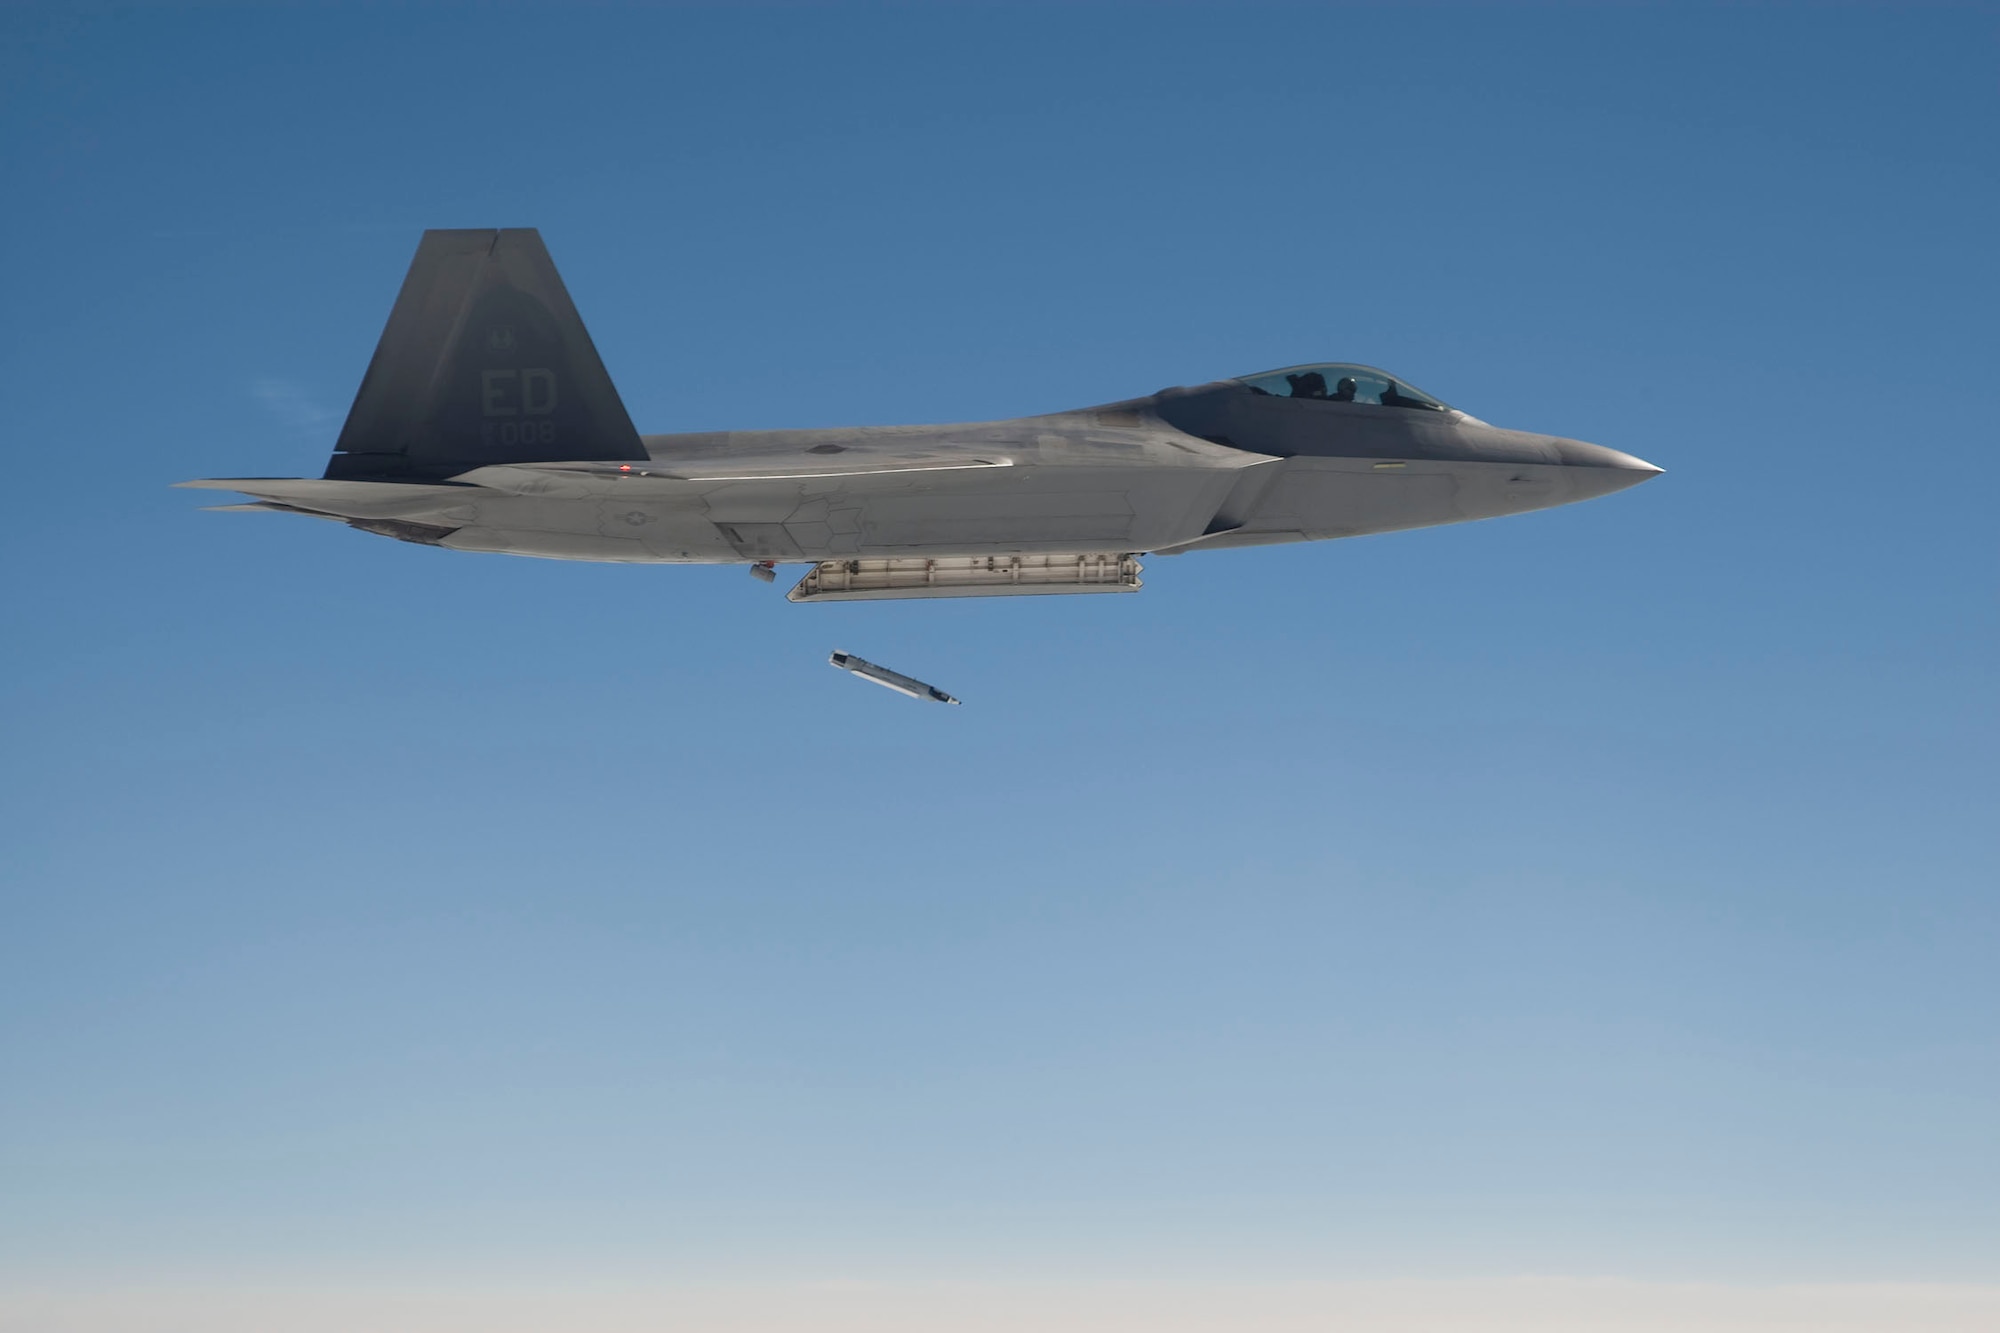 An Edwards F-22 Raptor drops a GBU-39 Small Diameter Bomb for the first time July 11 as part of a safe separation test to integrate the bomb to the aircraft. The SDB is a 250-pound class precision guided munition capable of destroying high-priority stationary targets from Air Force fighters and bombers from stand-off distances. 
(Lockheed-Martin photo by Kevin Robertson)